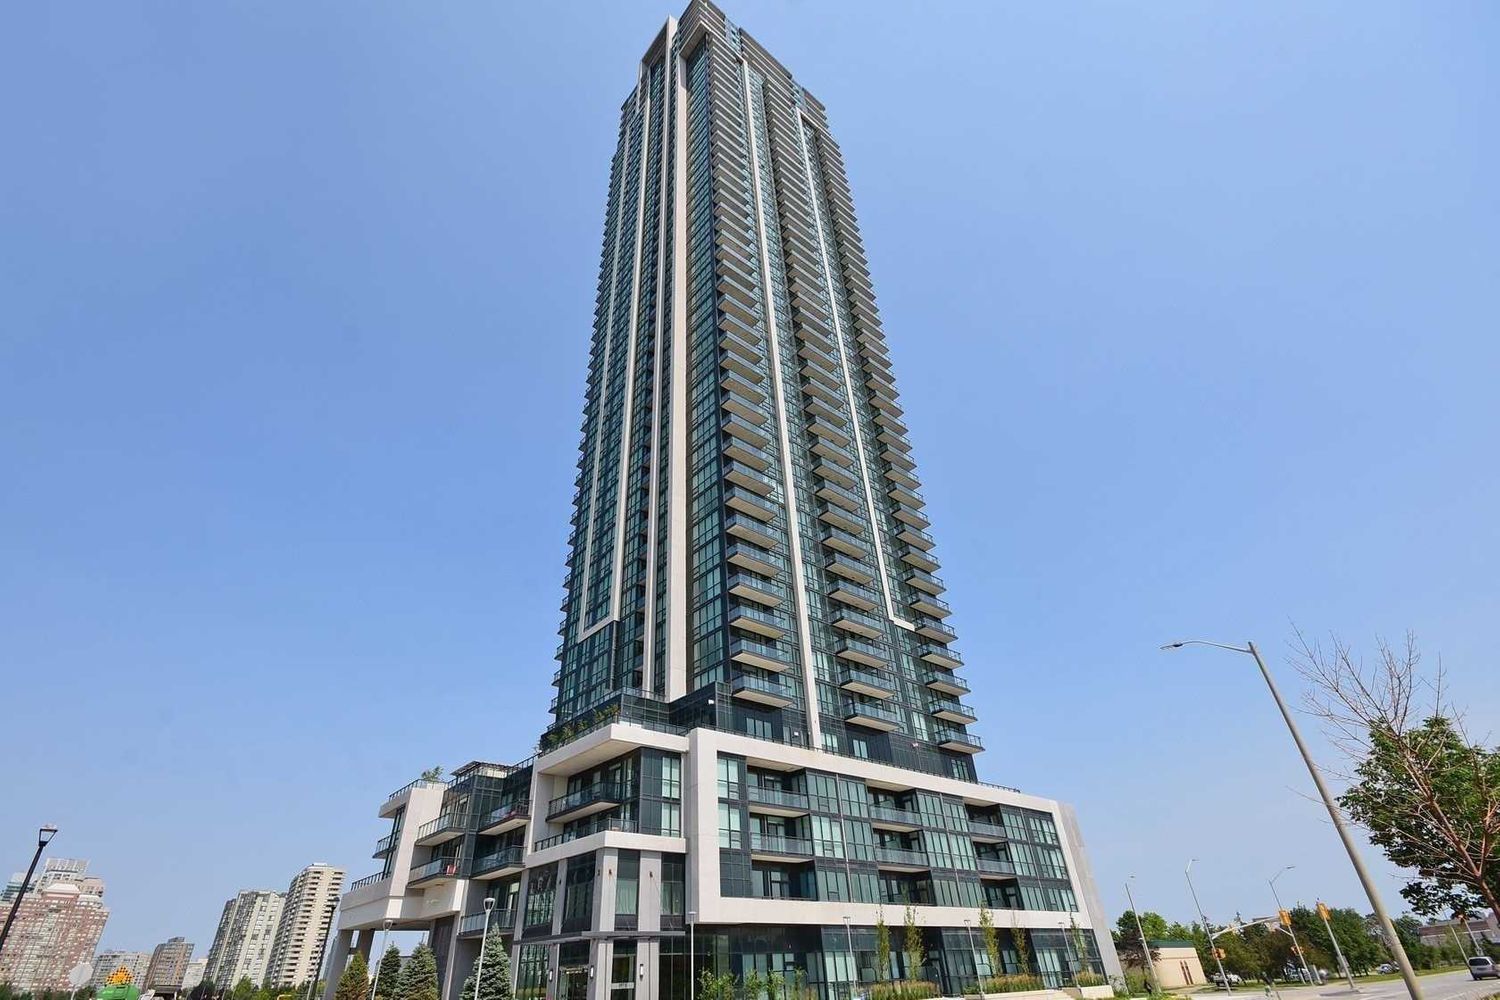 3975 Grand Park Drive. Pinnacle Grand Park II Condos is located in  Mississauga, Toronto - image #1 of 2